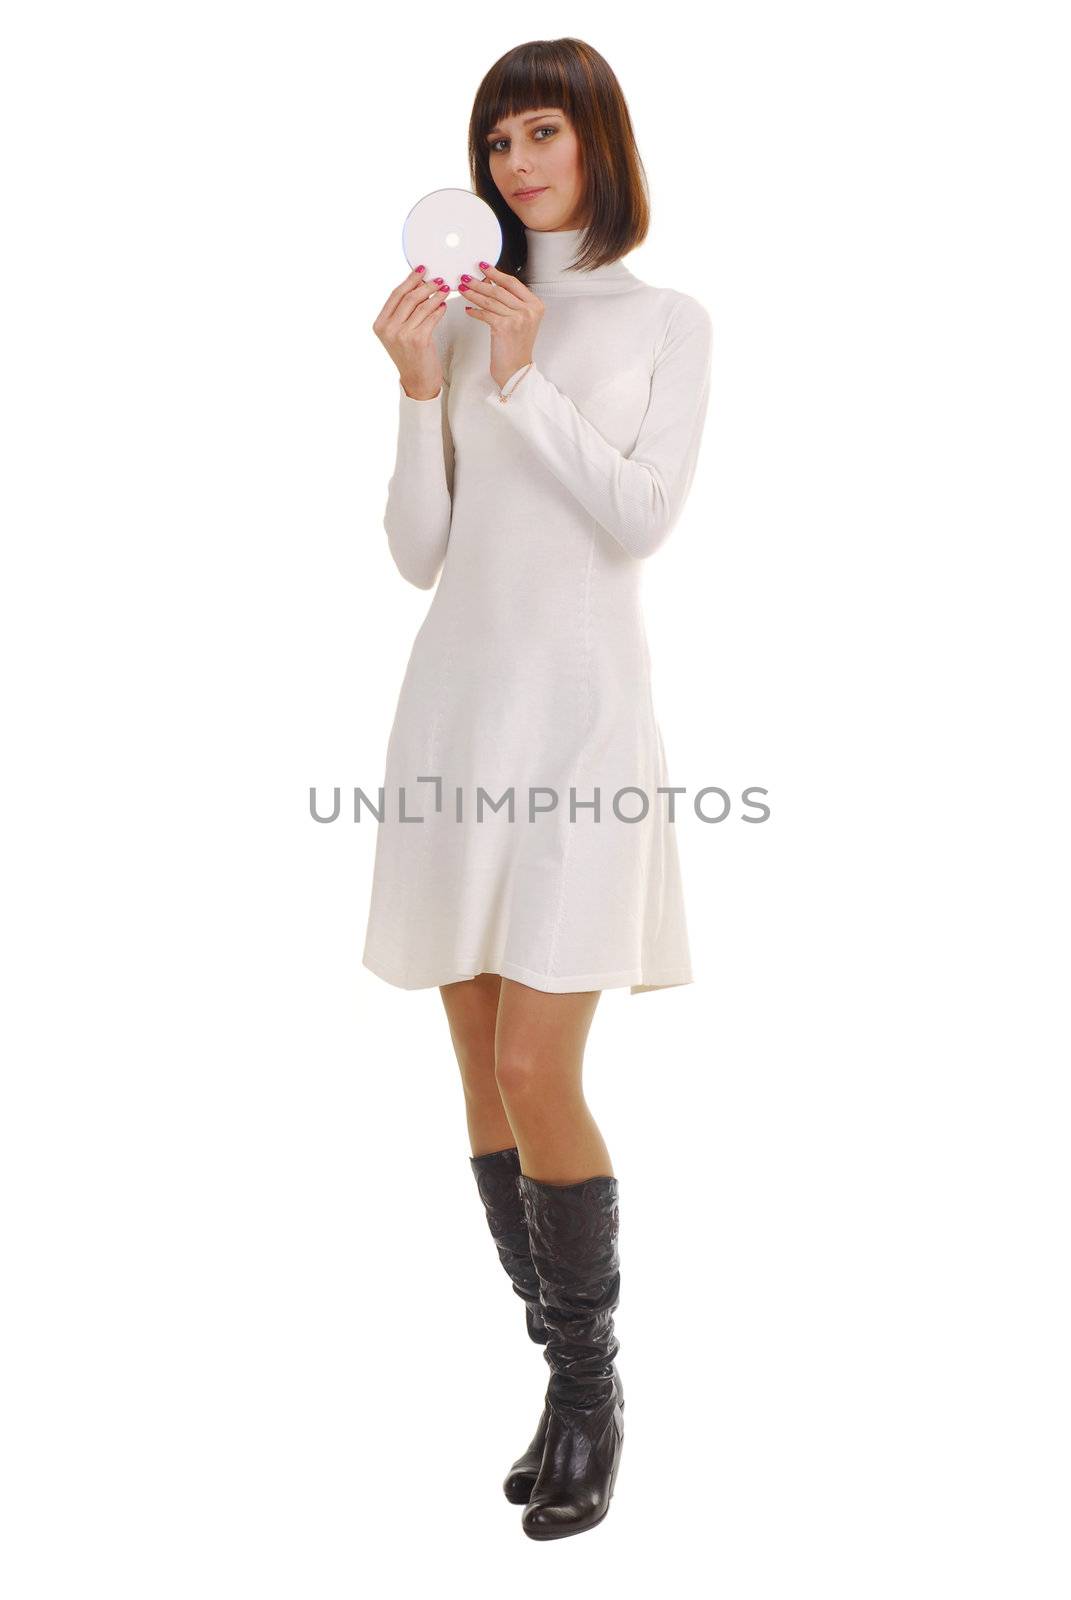 Young woman in white dress with white disk on white background